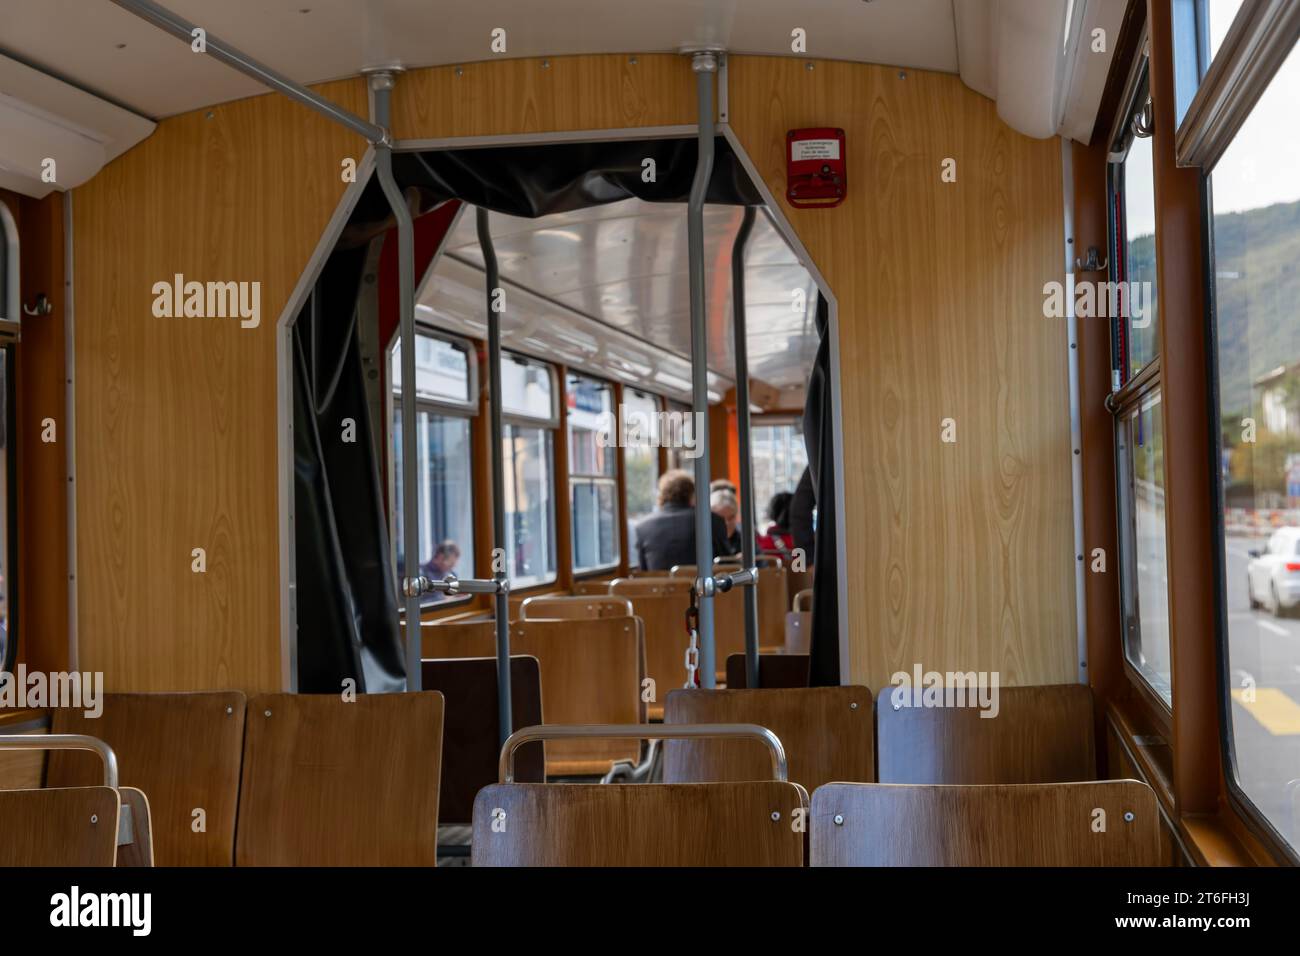 Inside an Old Railroad Wagon with Sunlight in Switzerland Stock Photo